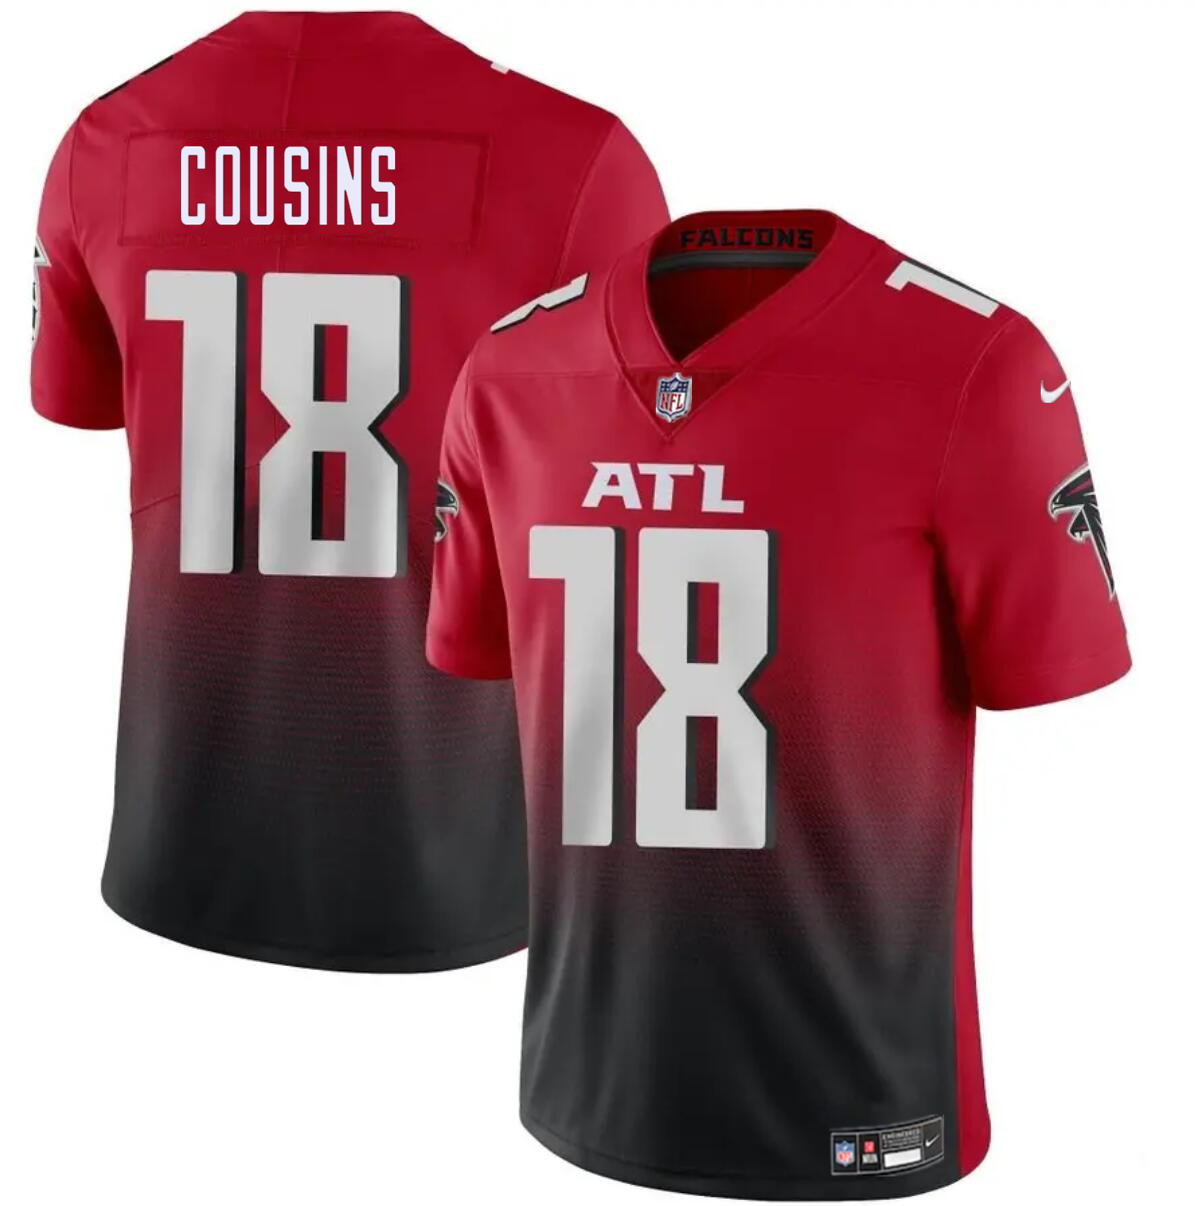 Youth Atlanta Falcons #18 Kirk Cousins Red/Black Vapor Untouchable Limited Stitched Football Jersey